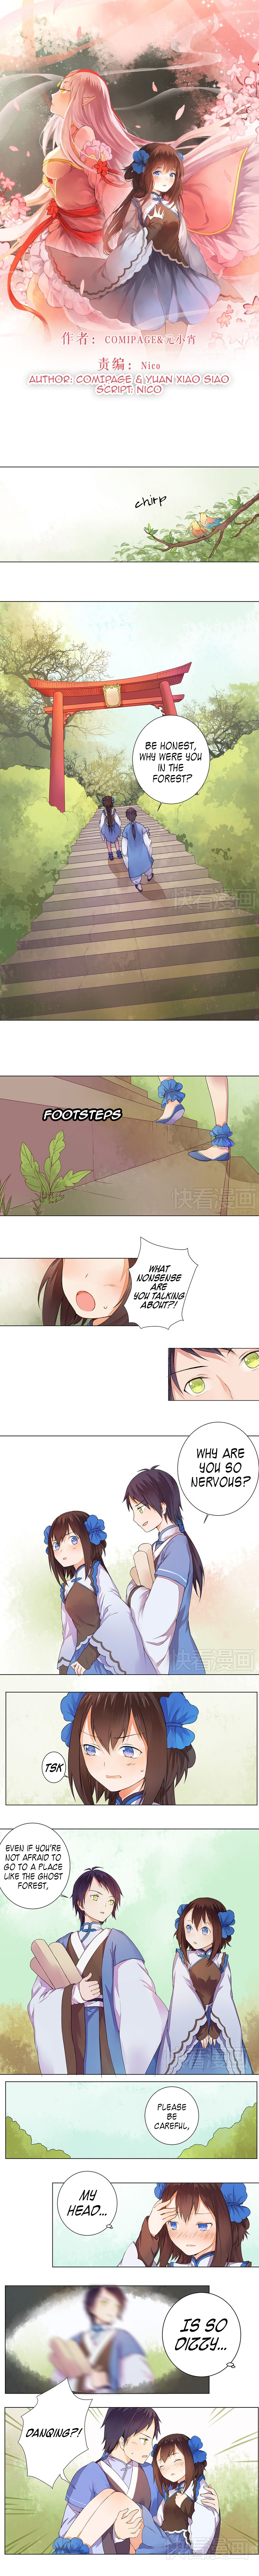 Peach Blossoms - Page 1